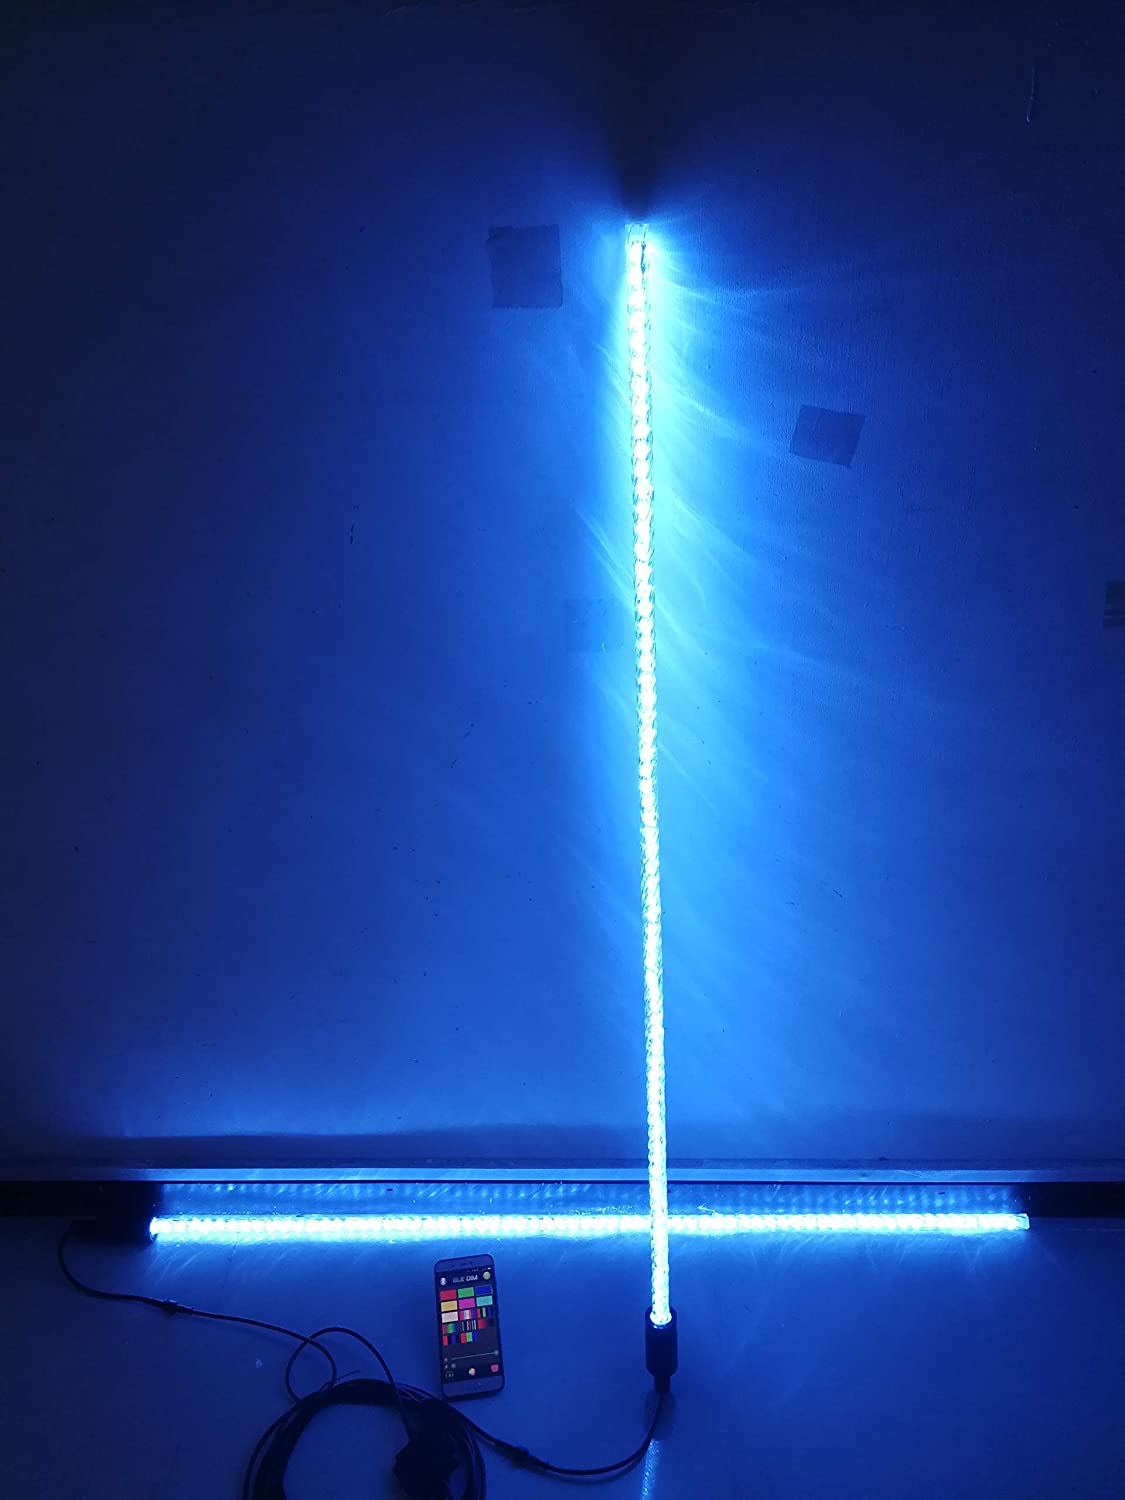 4ft Brightest RGB LED Whip Lights in Spiral Tube Blue-tooth App Control 2 Pieces